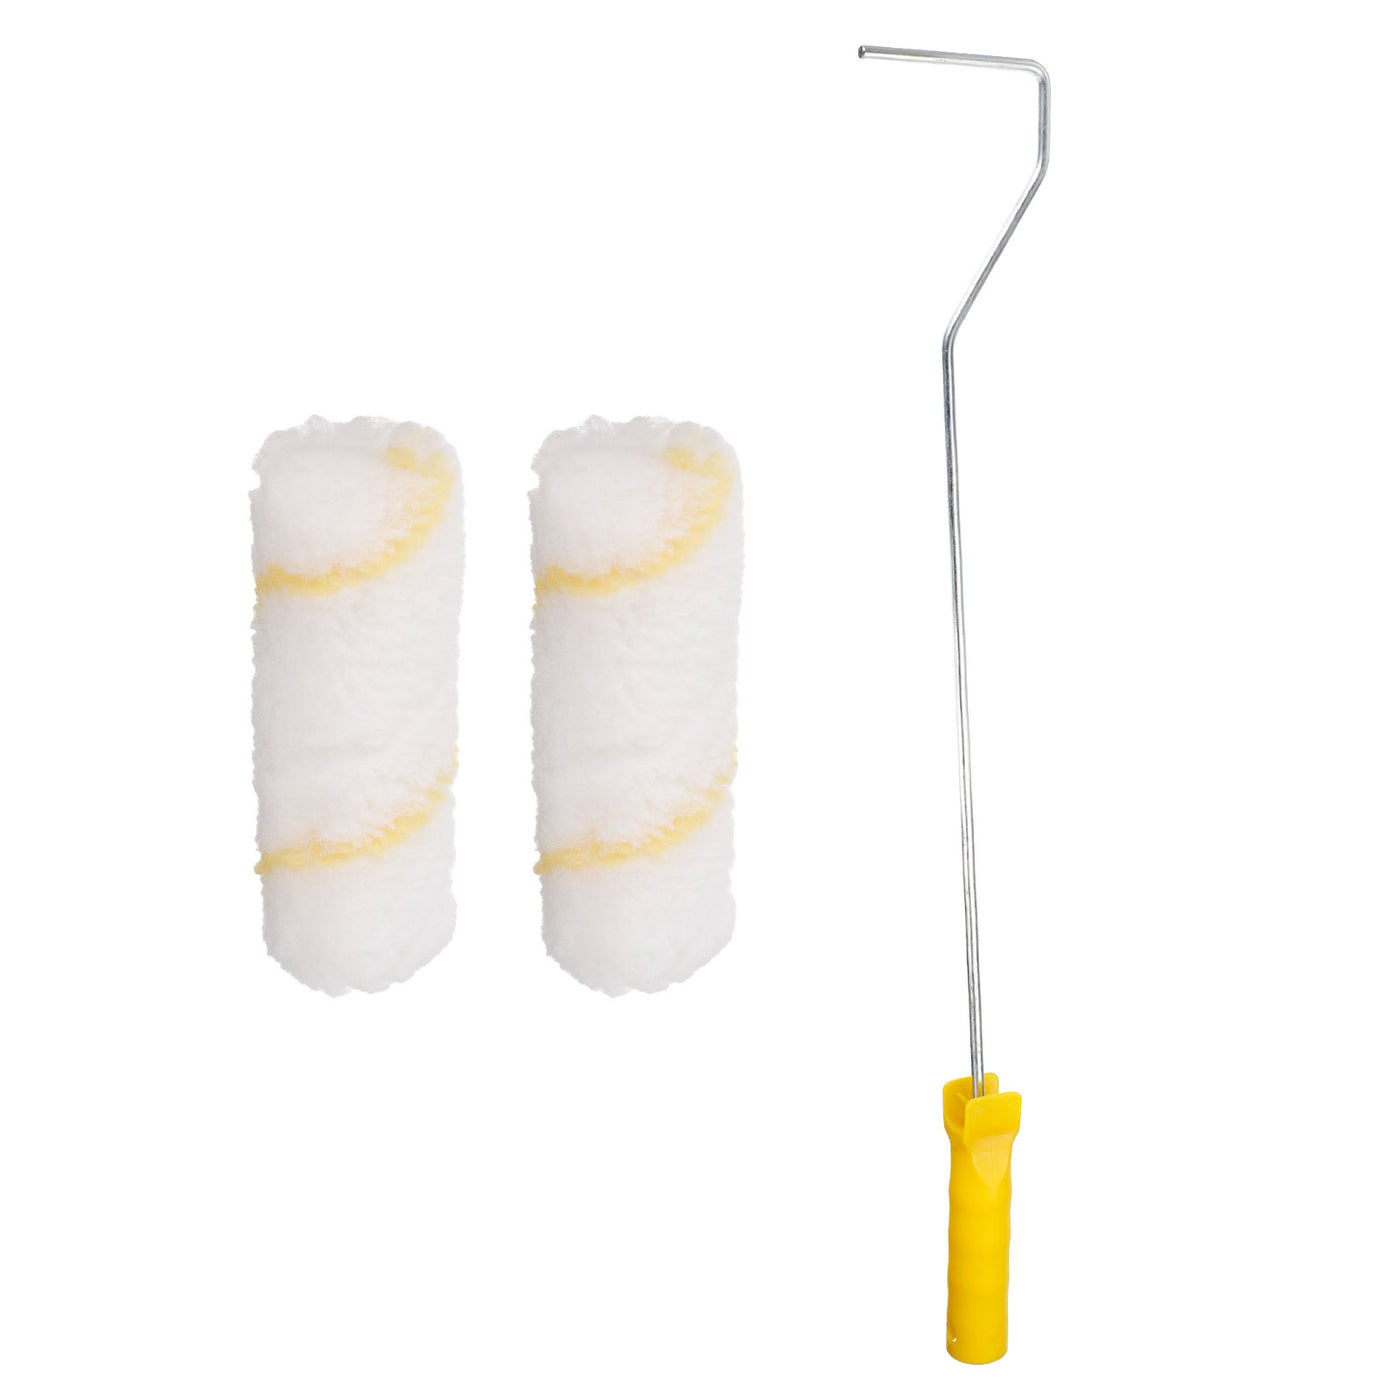 uxcell Uxcell 3Pcs Paint Roller Kit, 2Pcs 4" Microfiber Roller Covers and 21" Roller Frame